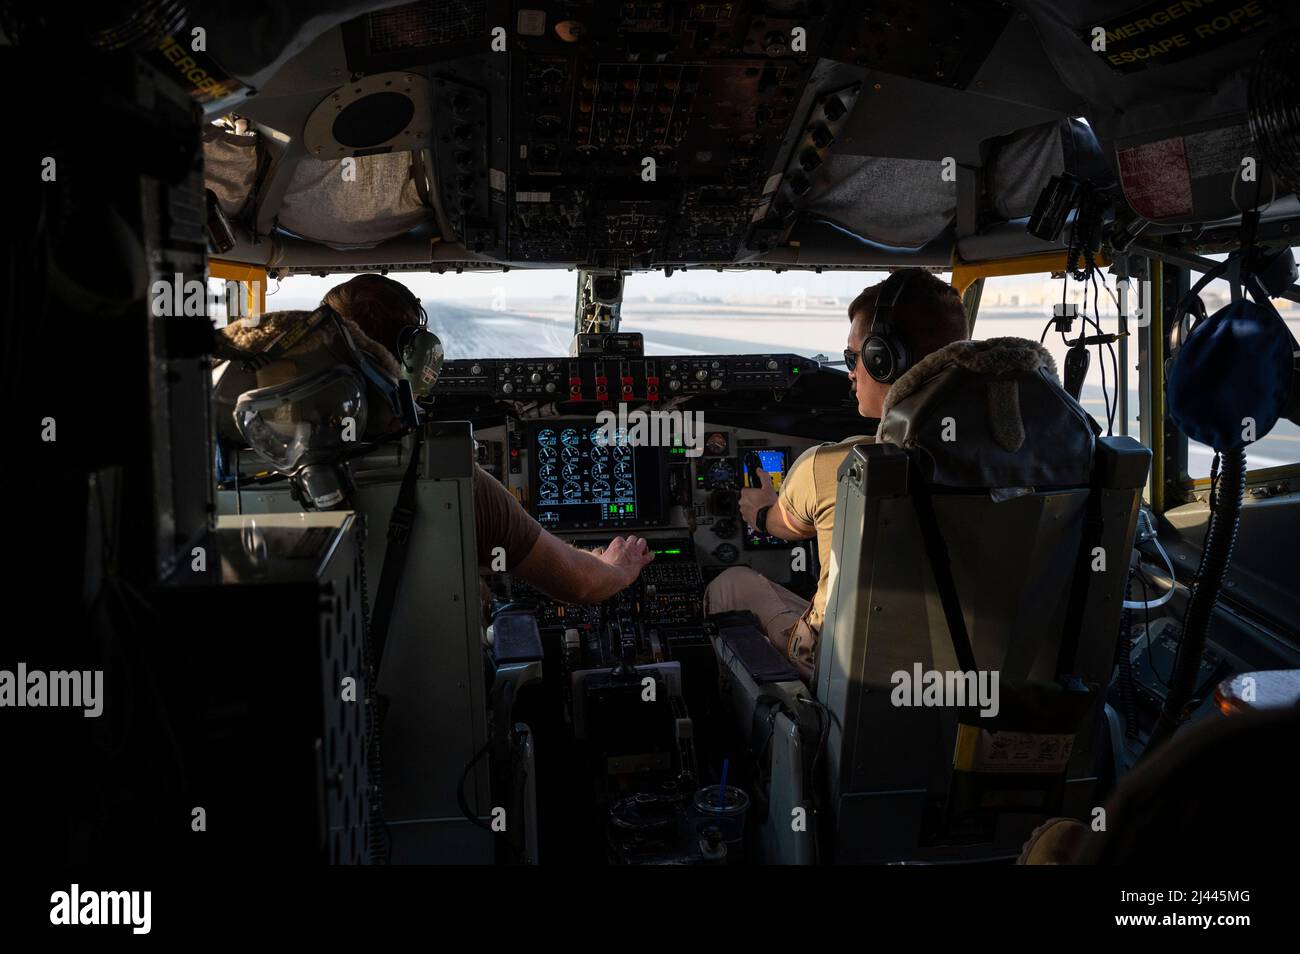 U.S. Air Force Maj. Thomas Evans, left, and 1st Lt. Kyle Blanchette, KC-135 Stratotanker aircraft pilots assigned to 340th Expeditionary Air Refueling Squadron, take off from Al Udeid Air Base, Qatar, April 6, 2022. The 340th EARS deployed with the Ninth Air Force (Air Forces Central), is responsible for delivering fuel to U.S. and partner nation forces, enabling airpower, deterrence, and stability. (U.S. Air Force photo by Tech. Sgt. Christopher Ruano) Stock Photo